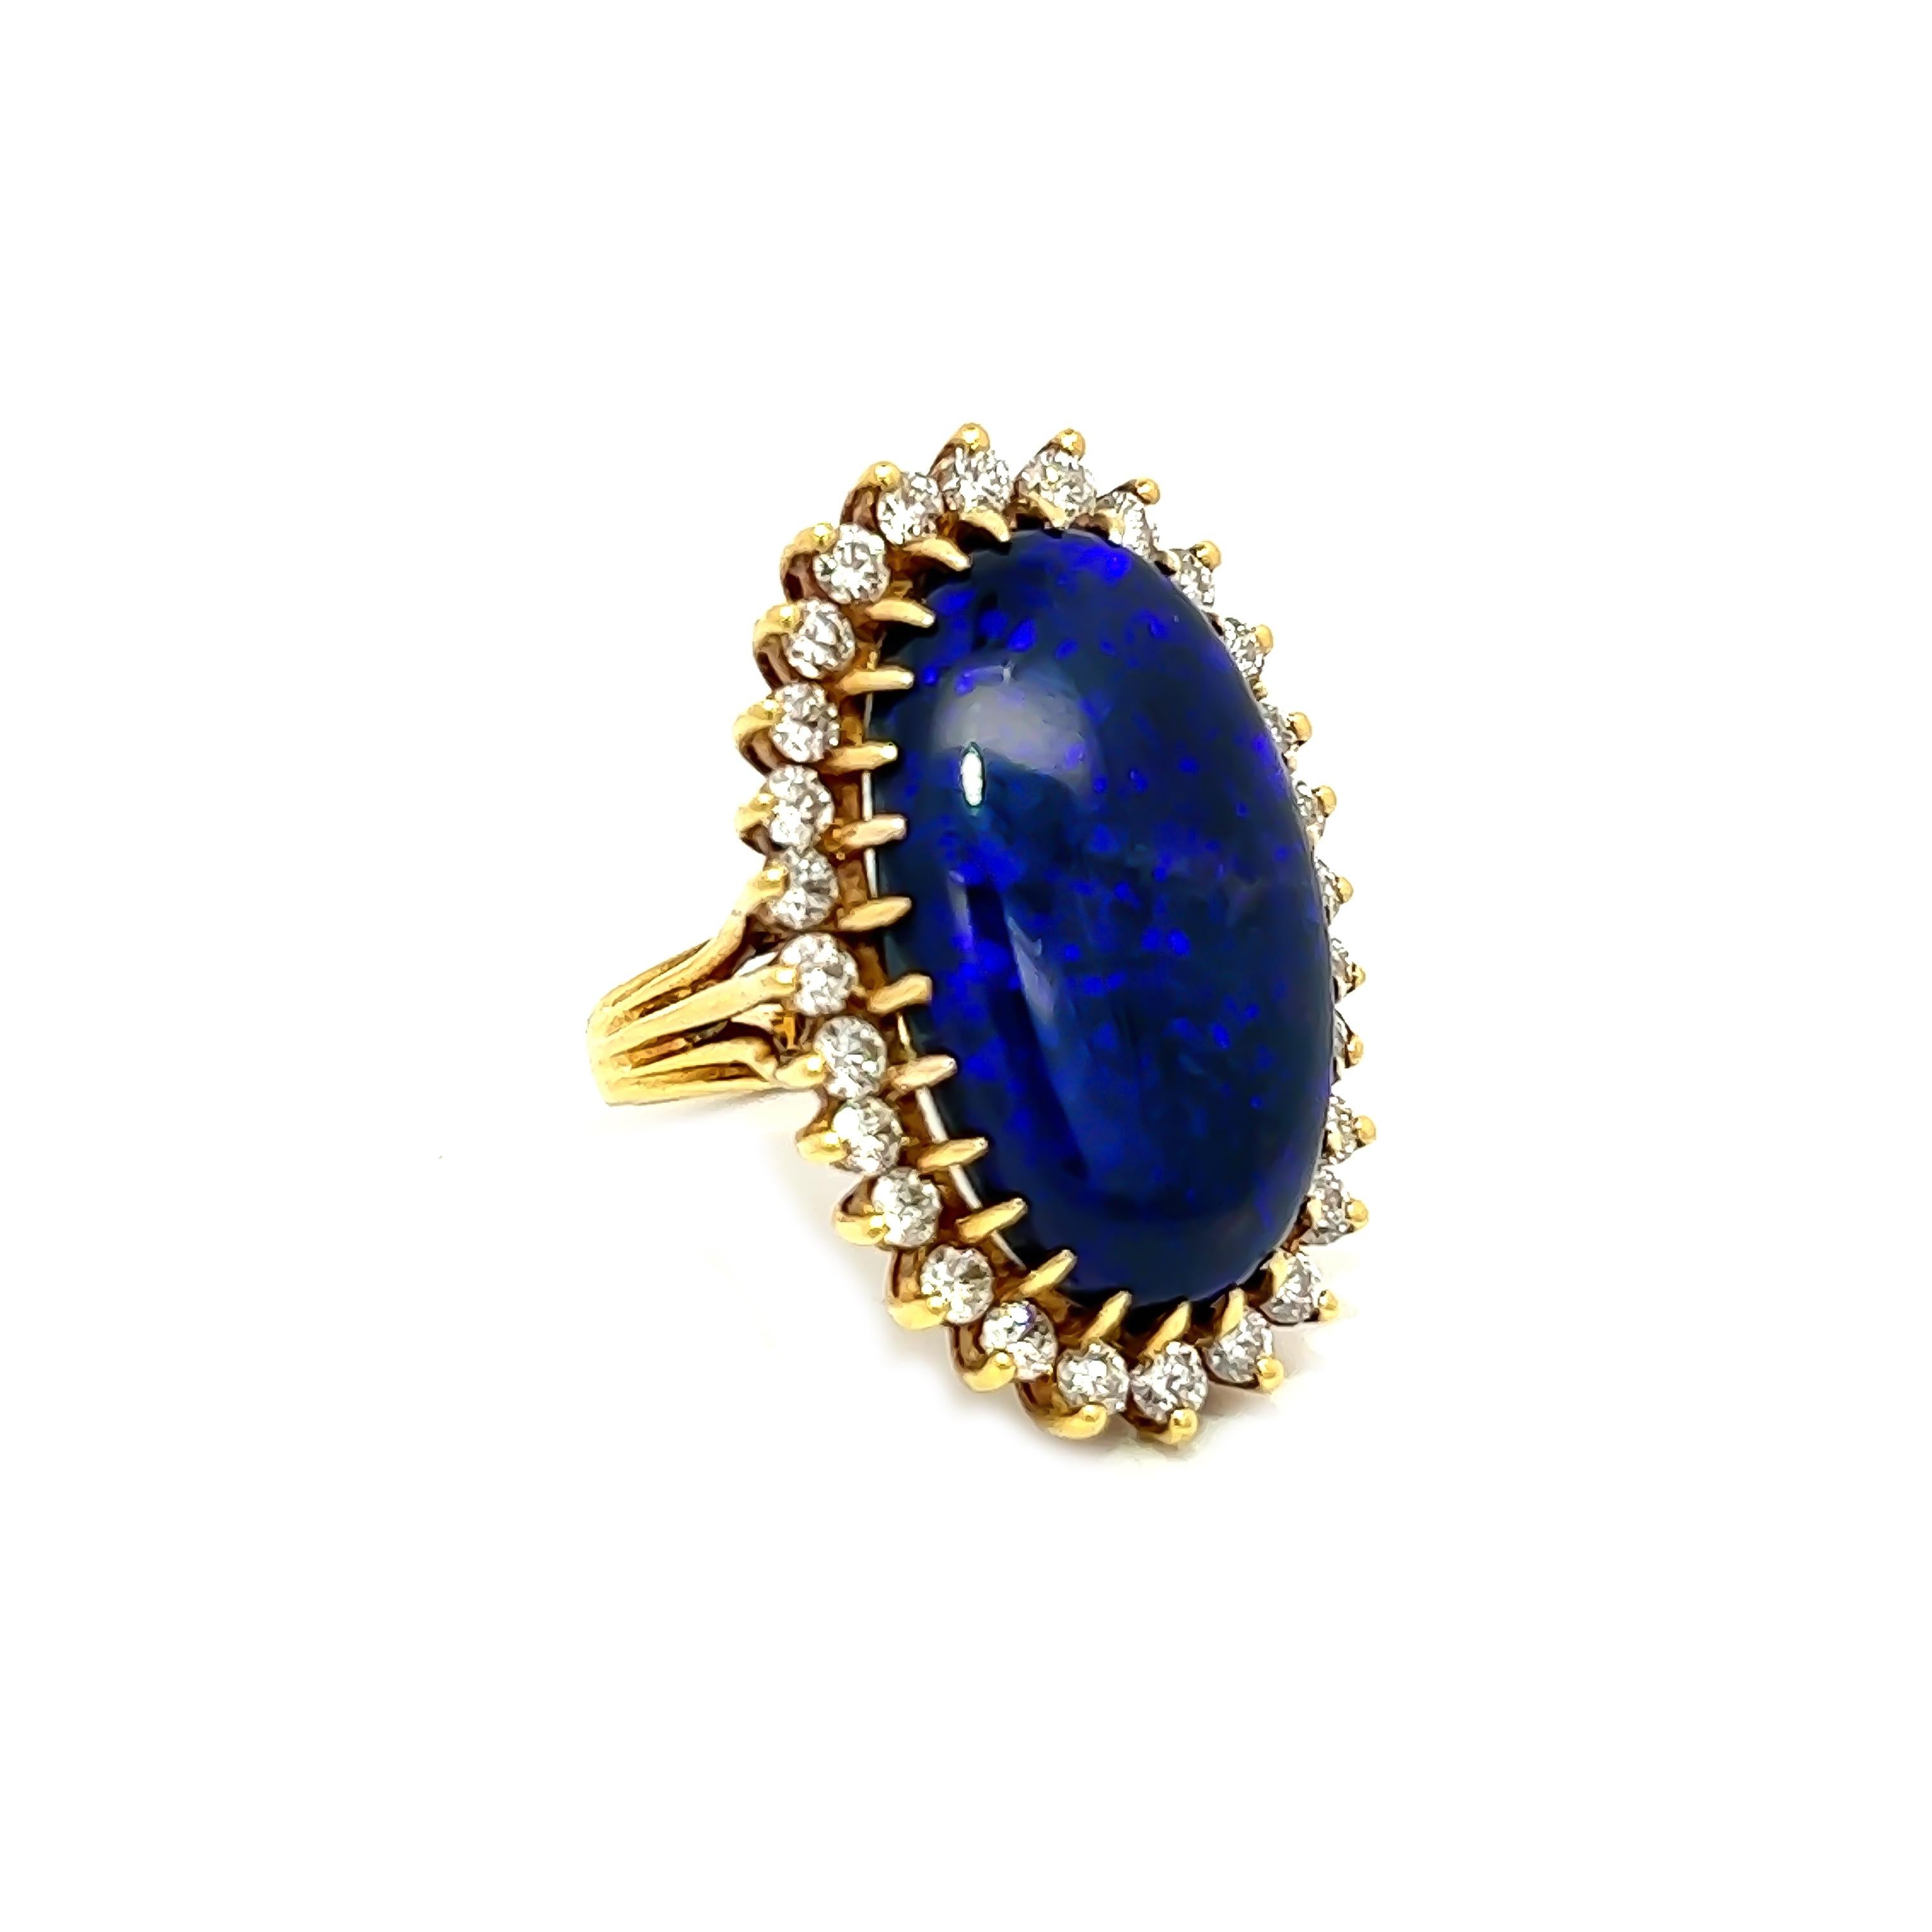 This exquisite black opal ring measures around 24x15MM and is an impressive 16.96CT in weight. The opal showcases a magnificent range of colors, with a captivating and deep purple hue being the most prominent. The opal is elegantly surrounded by 30